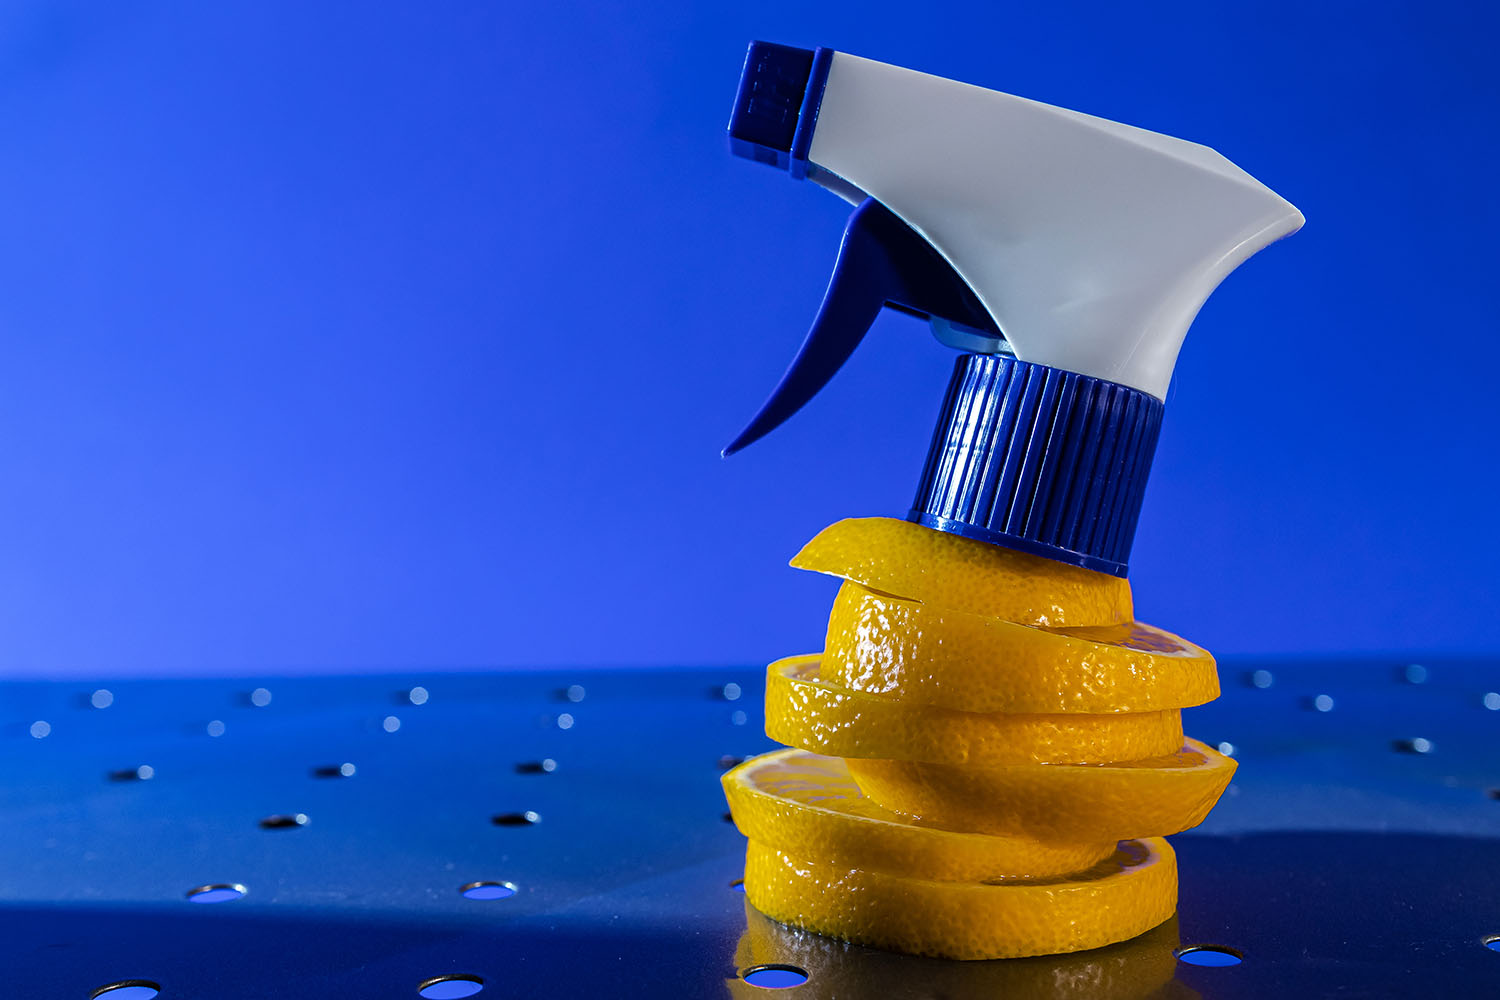 air freshener and window cleaner and lemon on a metal surface on a blue background